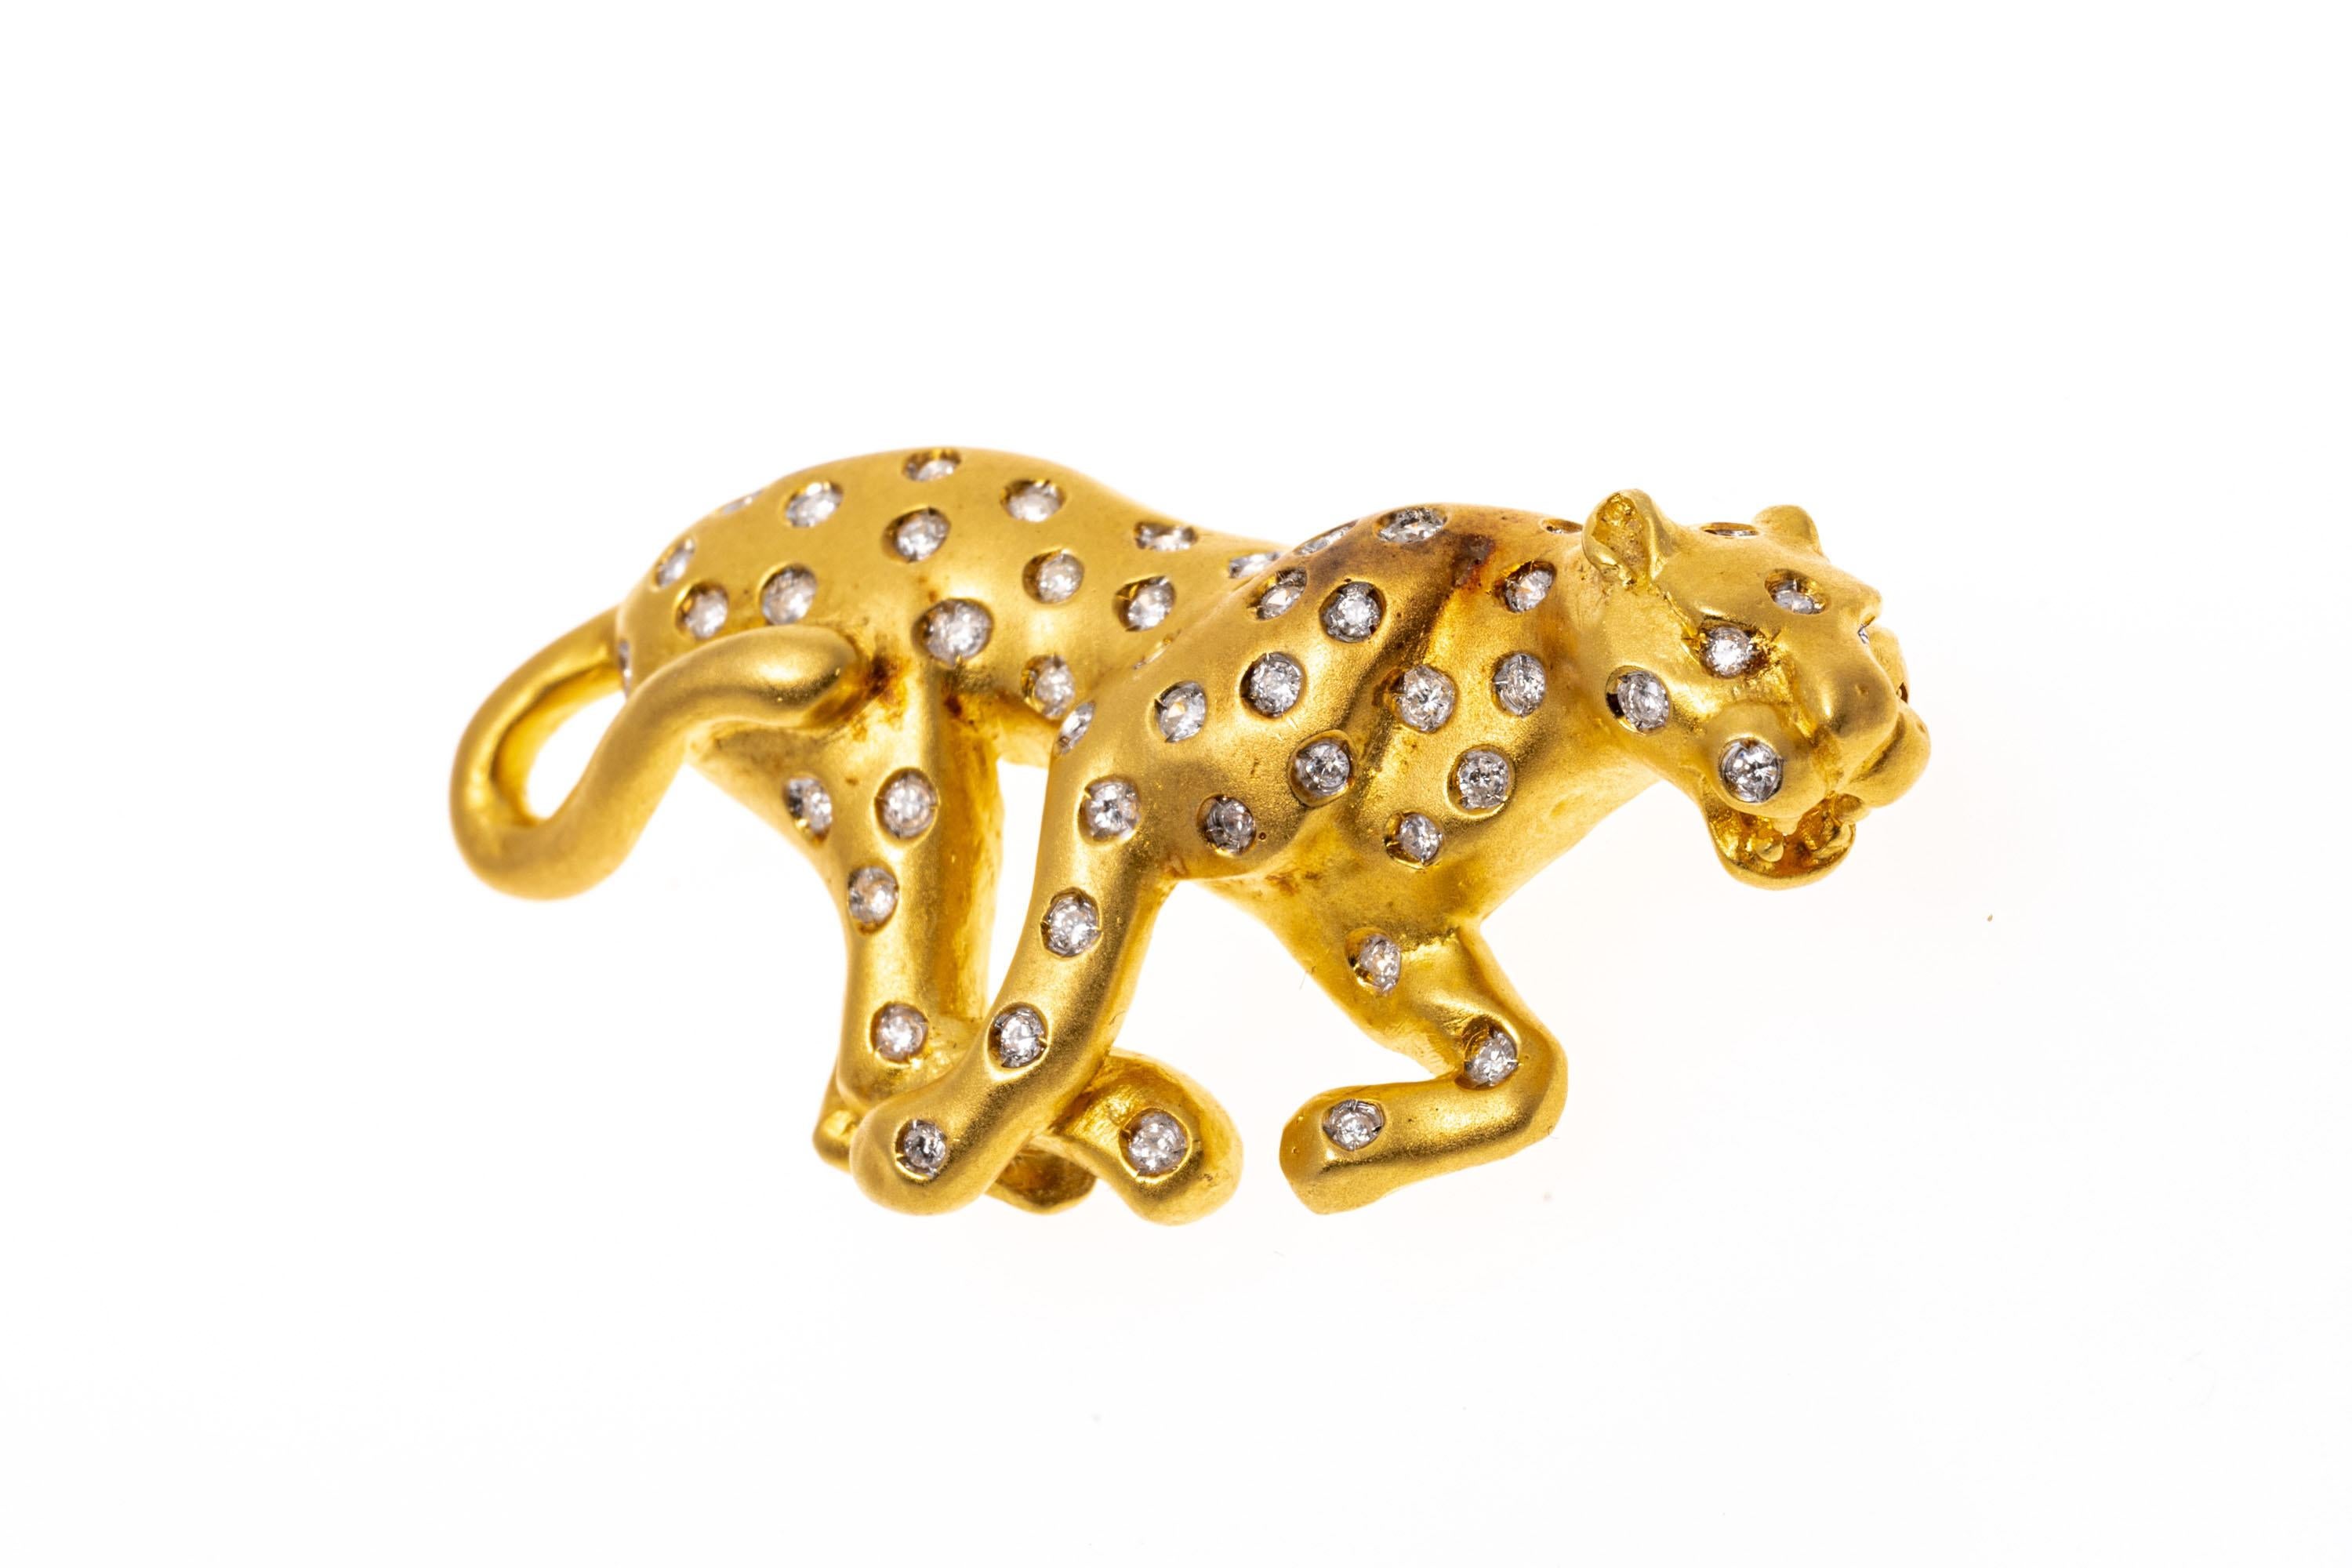 18k yellow gold brooch. This delightful brooch is a stalking leopard profile, matte finished and decorated throughout with round faceted diamonds, approximately 0.49 TCW, flush set.
Marks: 18k
Dimensions: 1 13/16